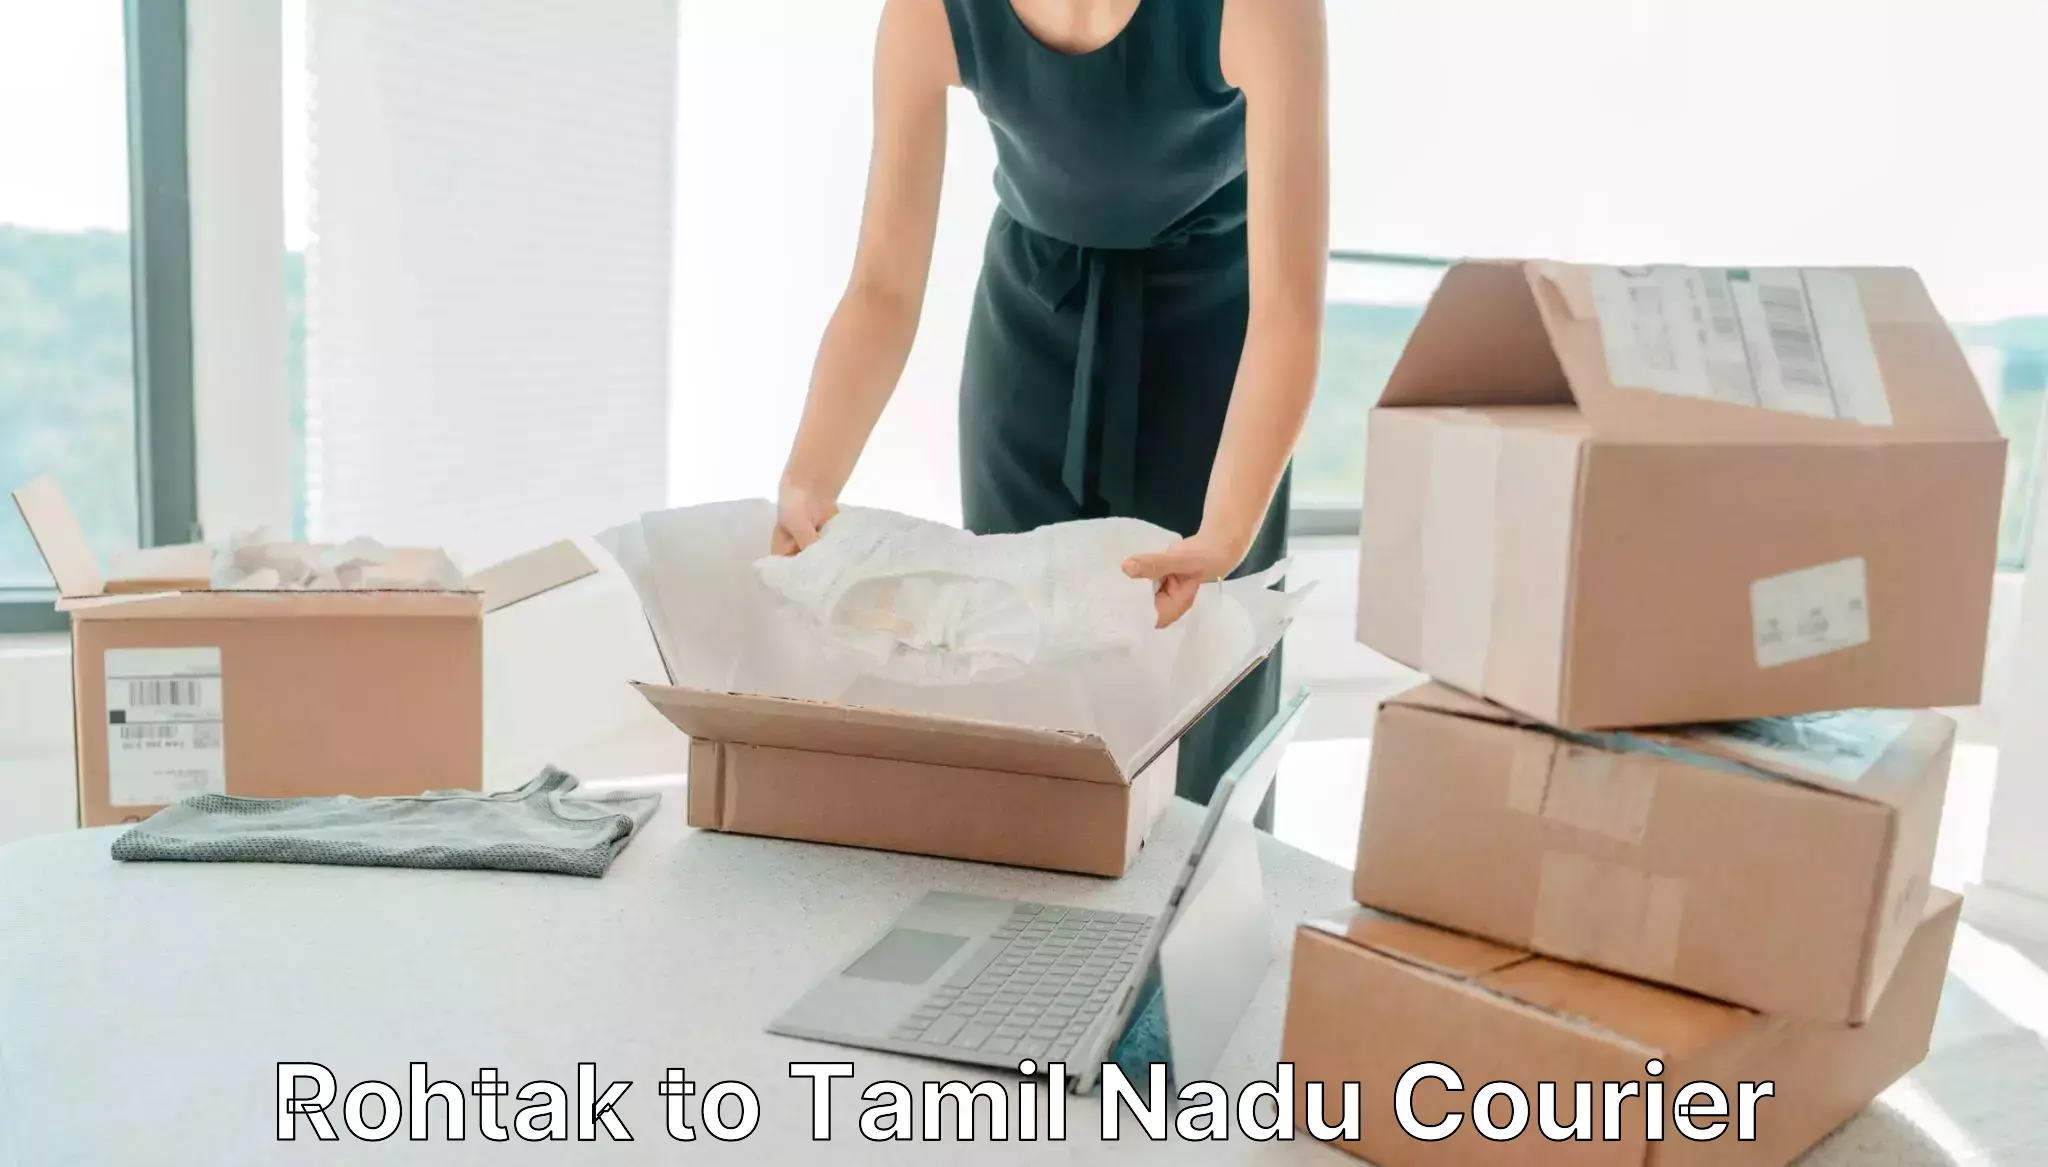 Courier service booking Rohtak to Chennai Port